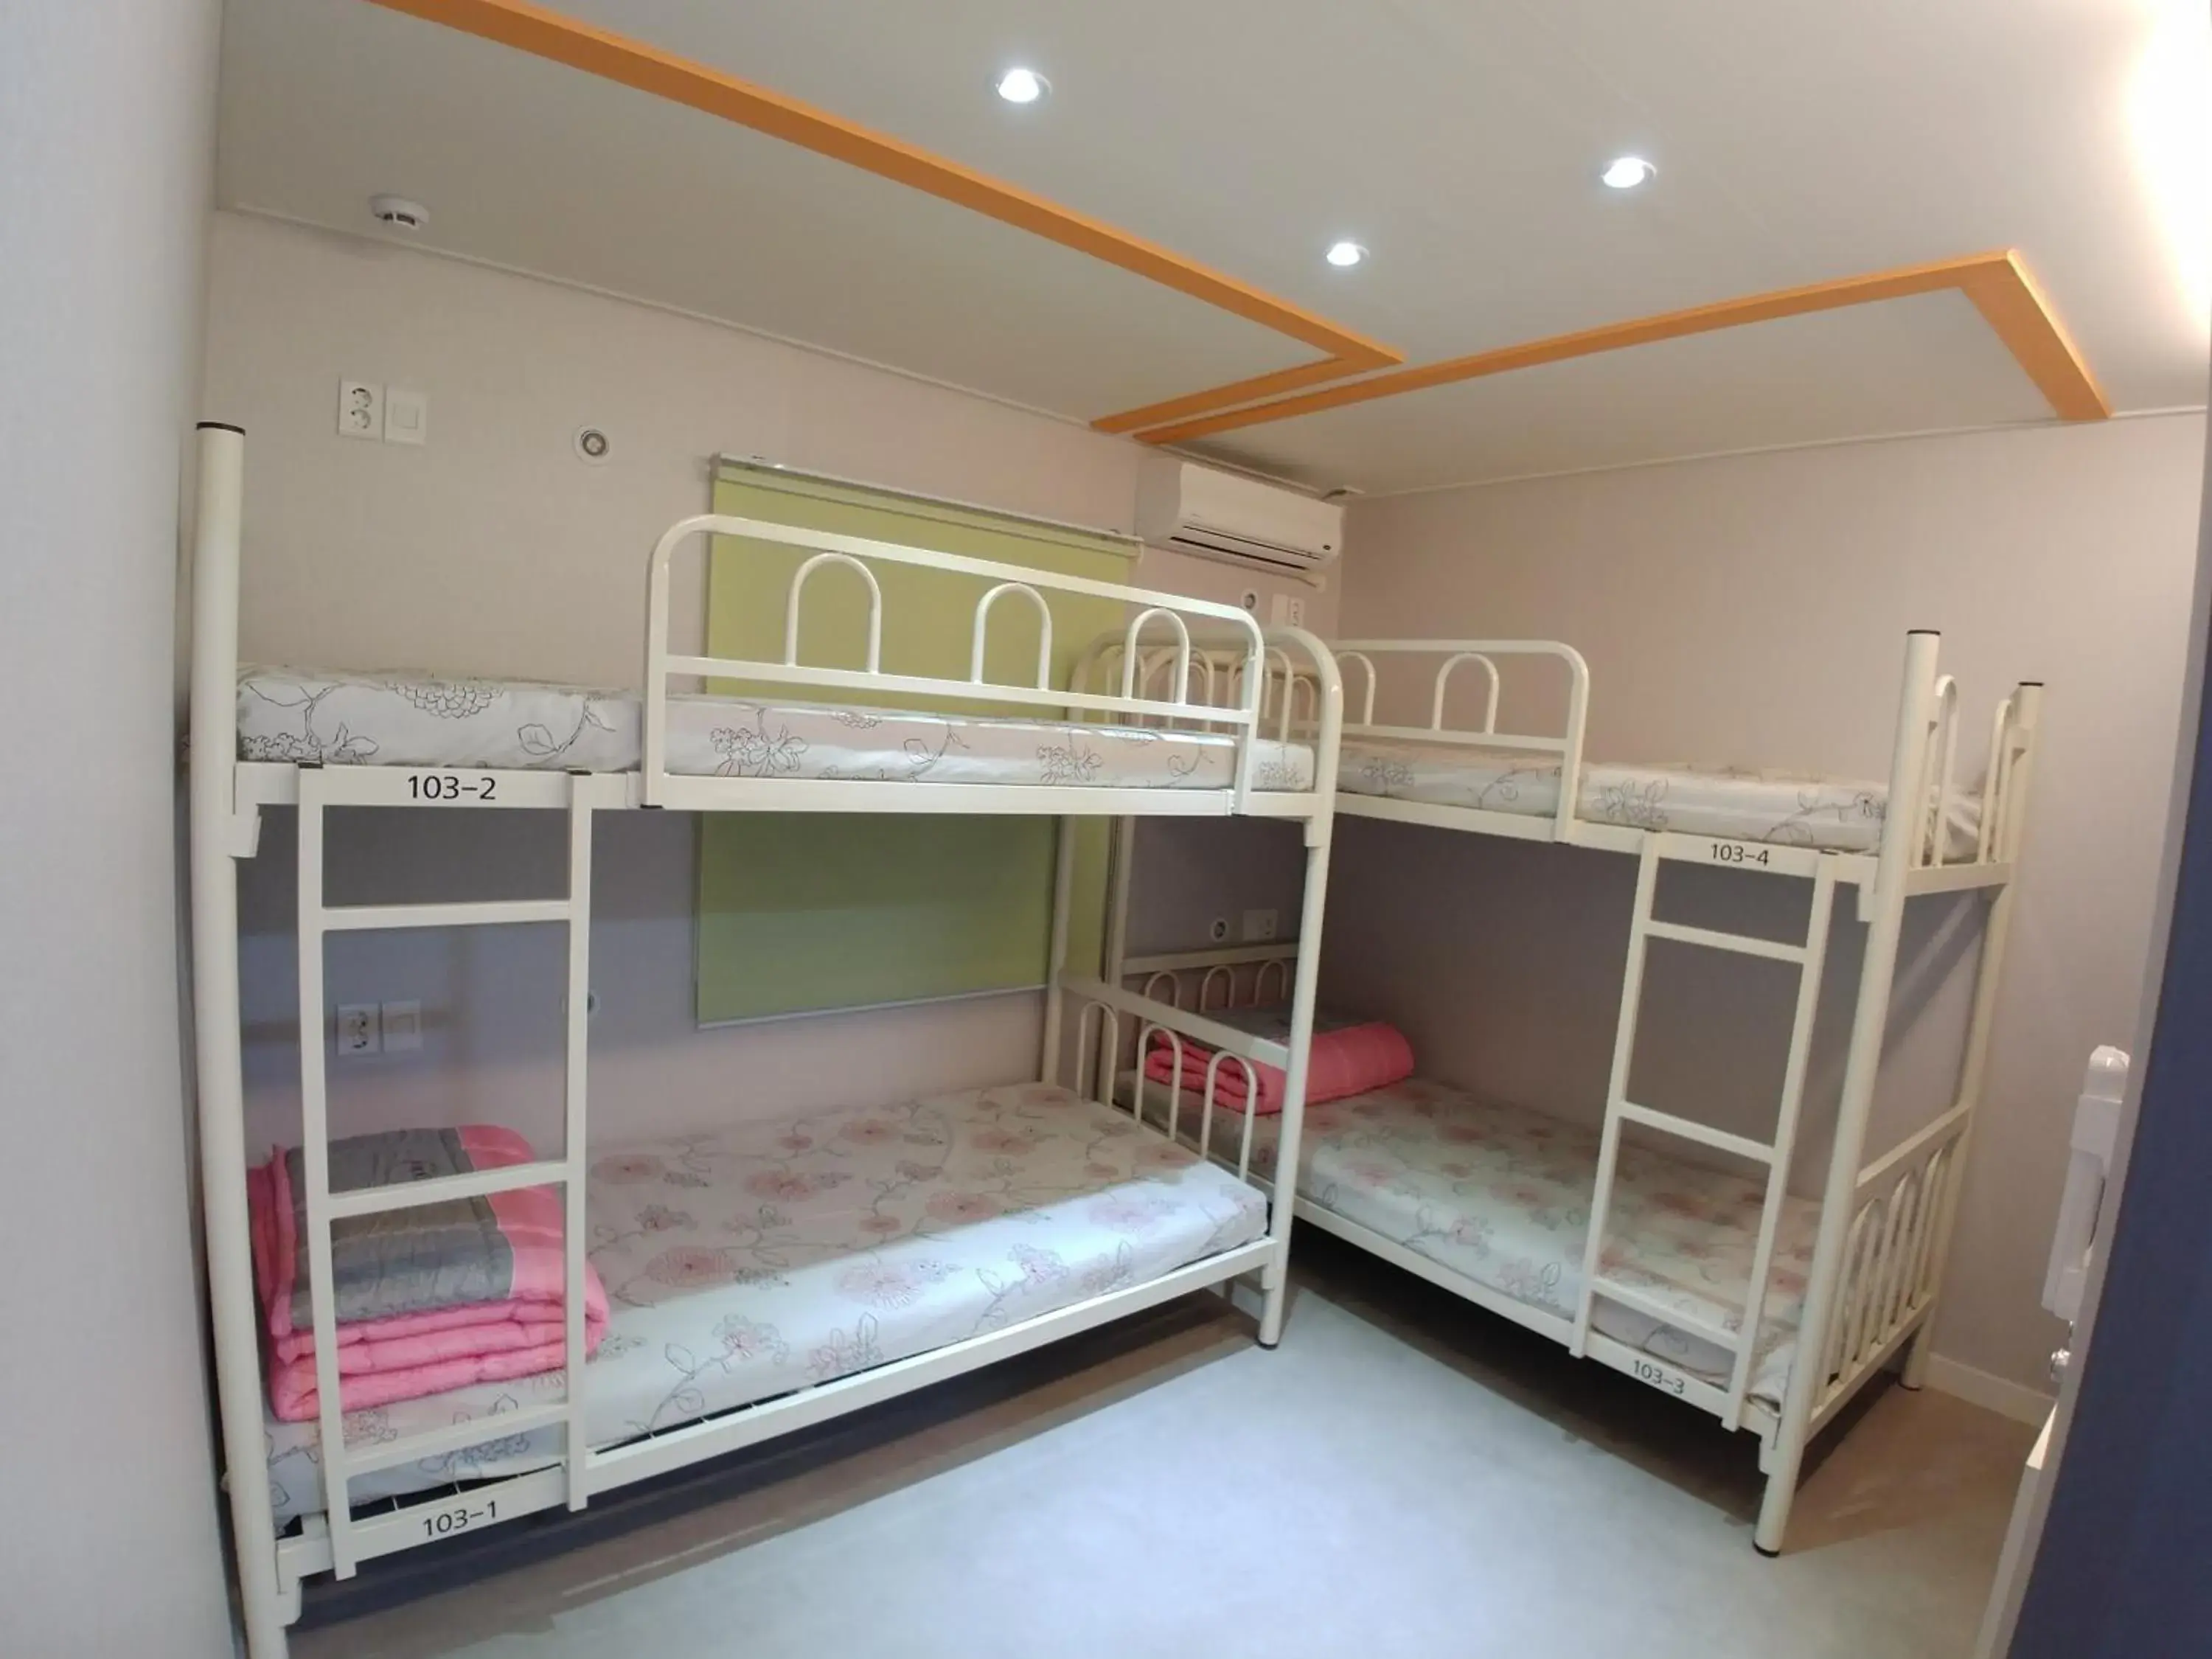 Bunk Bed in Bomgoro Guesthouse